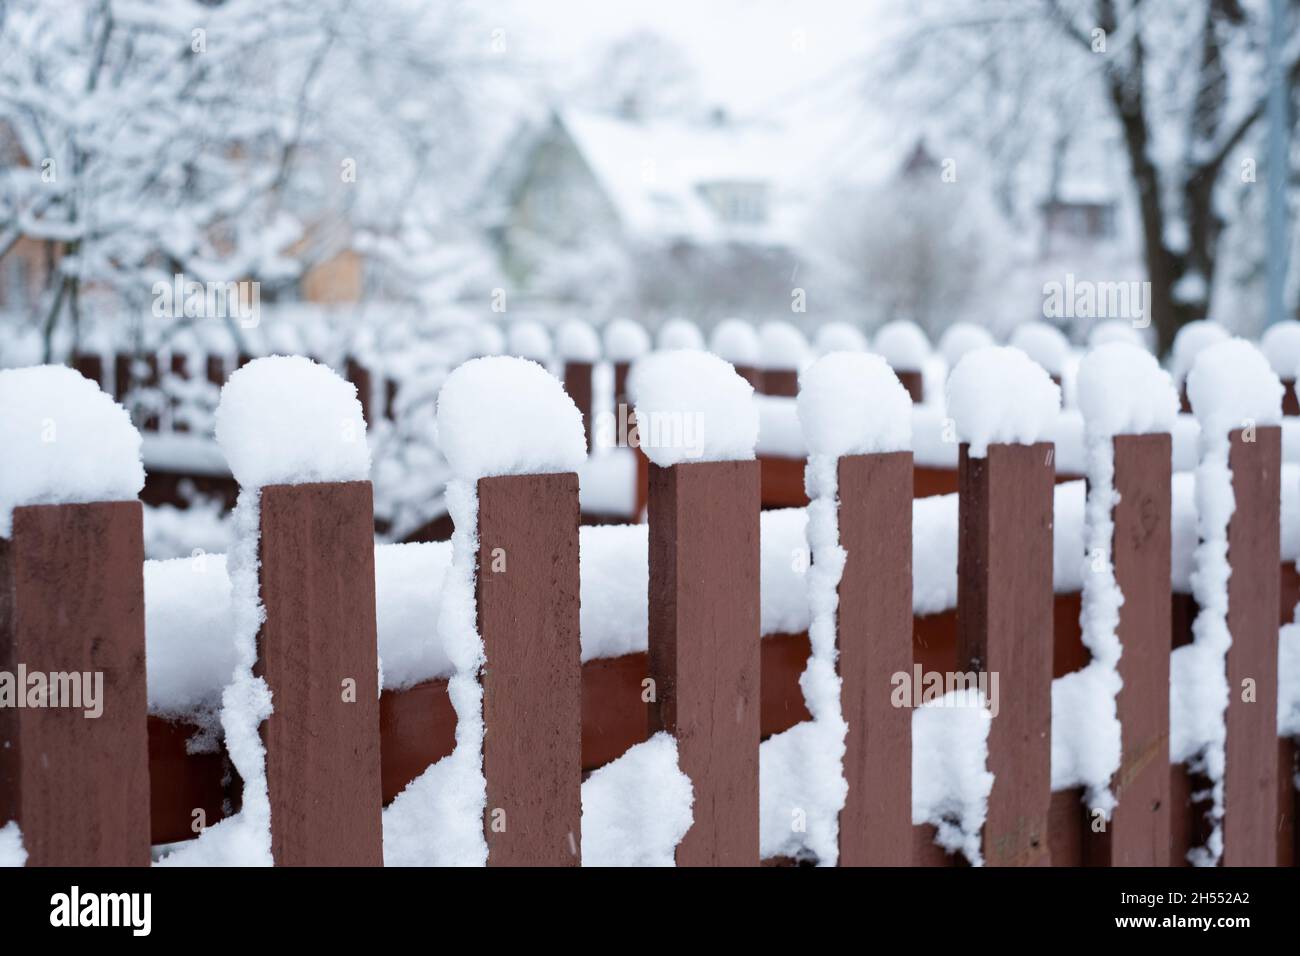 Snow cover. Winter weather. Garden under snow. Close-up of wooden fence covered in snow during winter season. Stock Photo